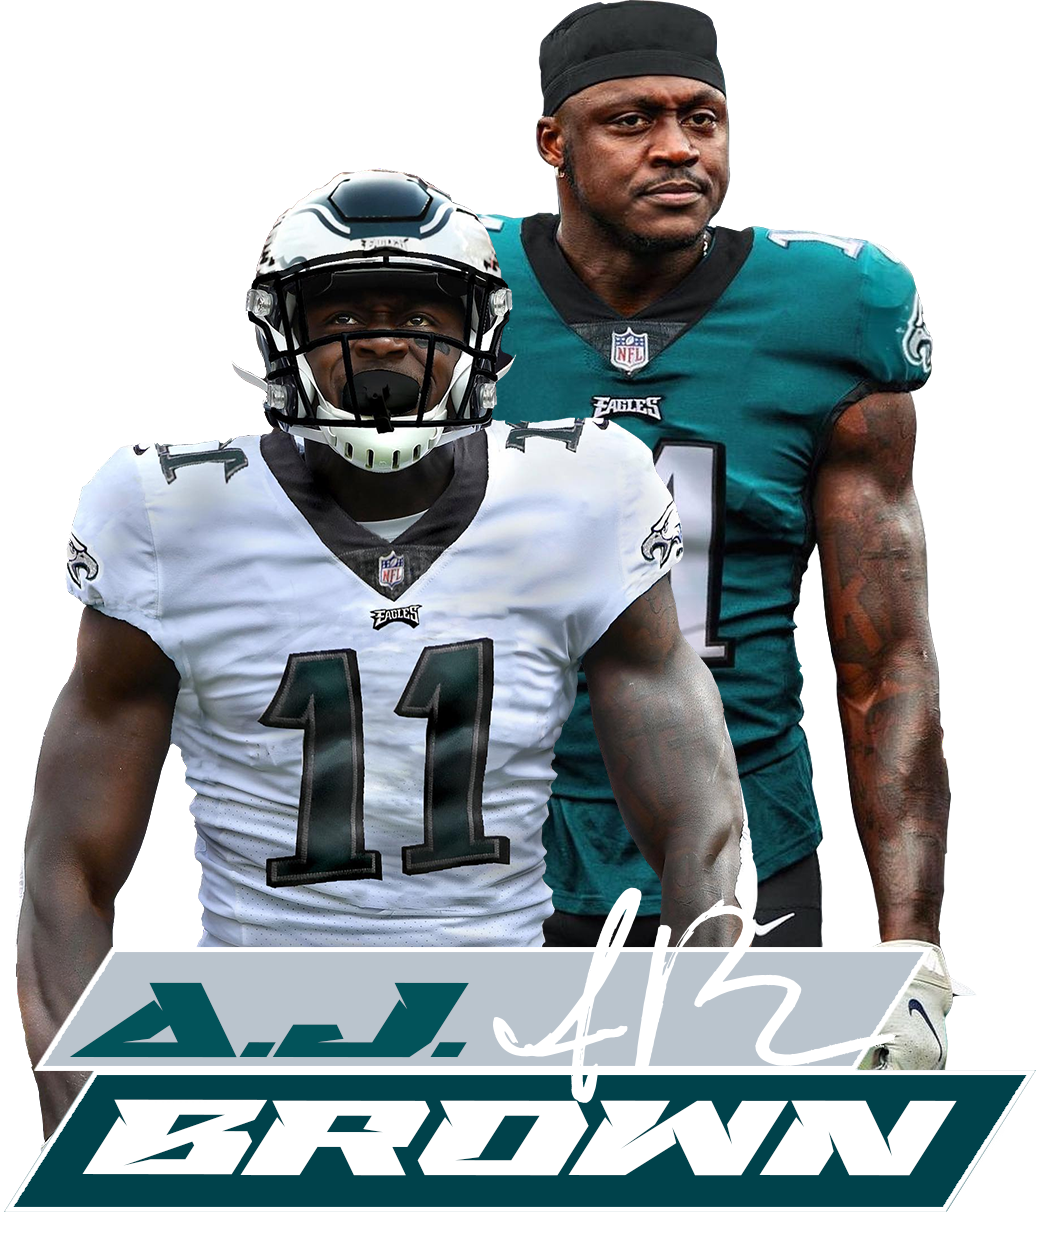 A.J. Brown sets record for most receiving yards in Eagles debut